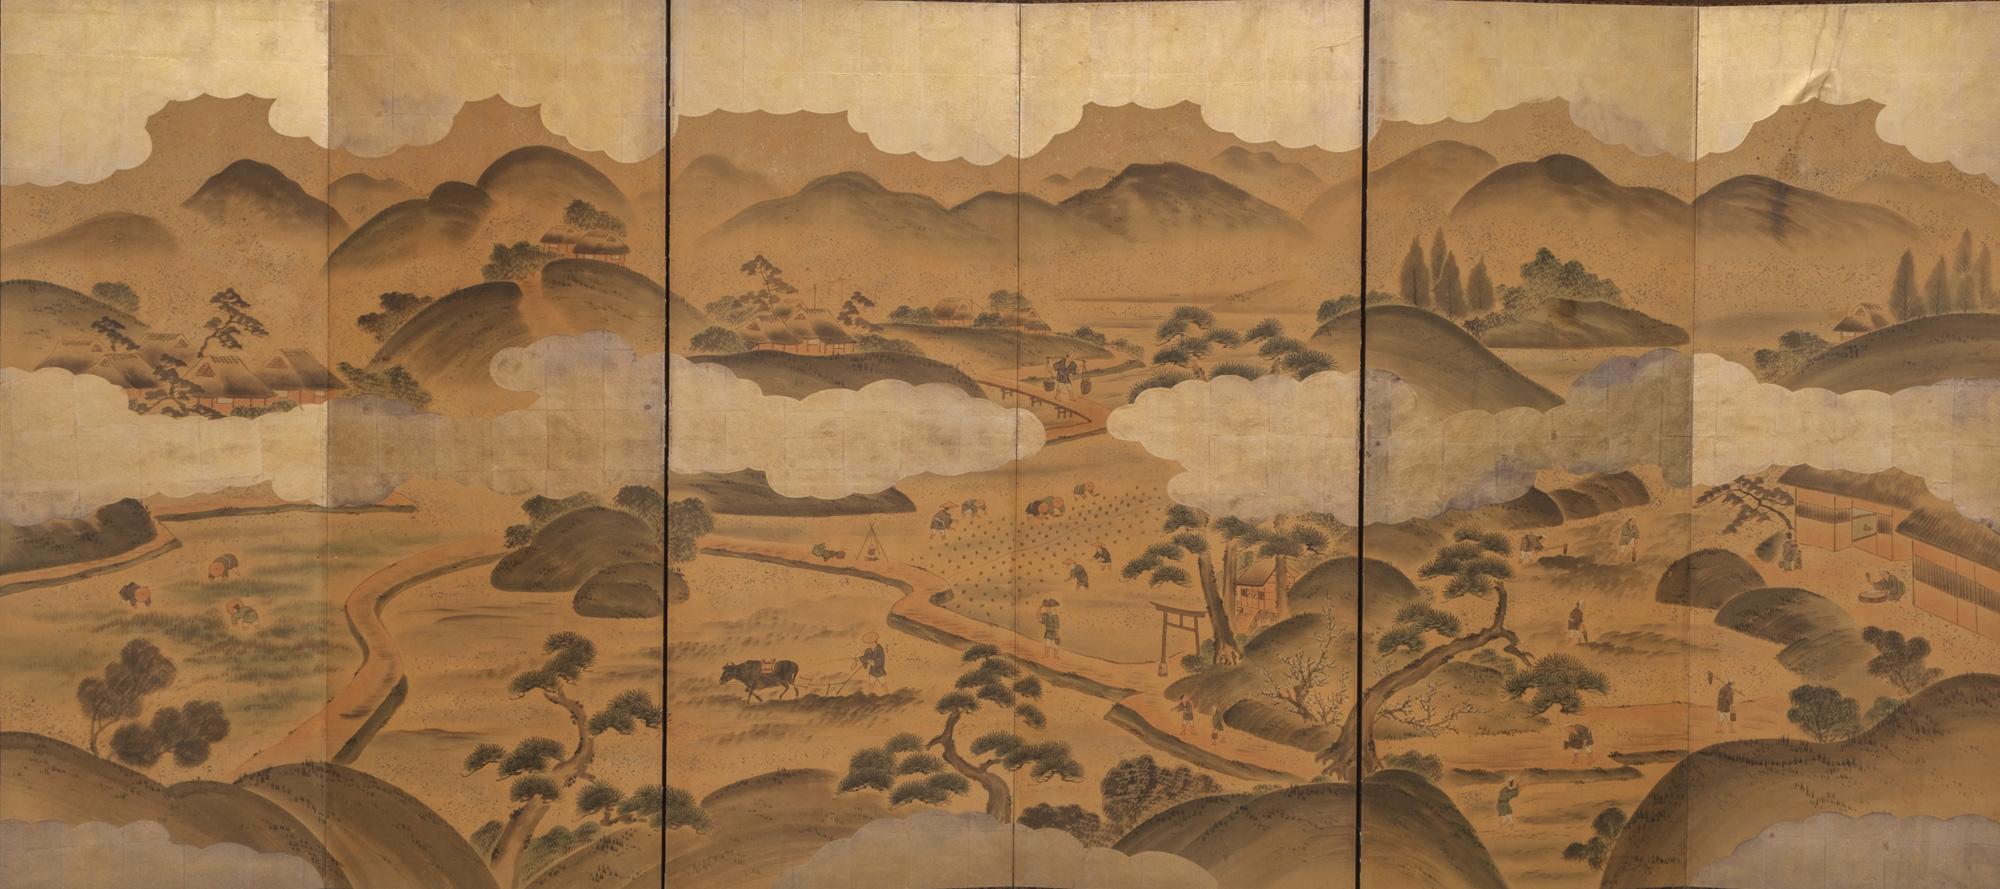 Fascinating large six-panel byôbu (folding screen) with a detailed genre painting on goldish silver leaf with different scenes of people at work in a rural mountain village during the Edo period.

Farmers are hard at work in the large rice paddies.